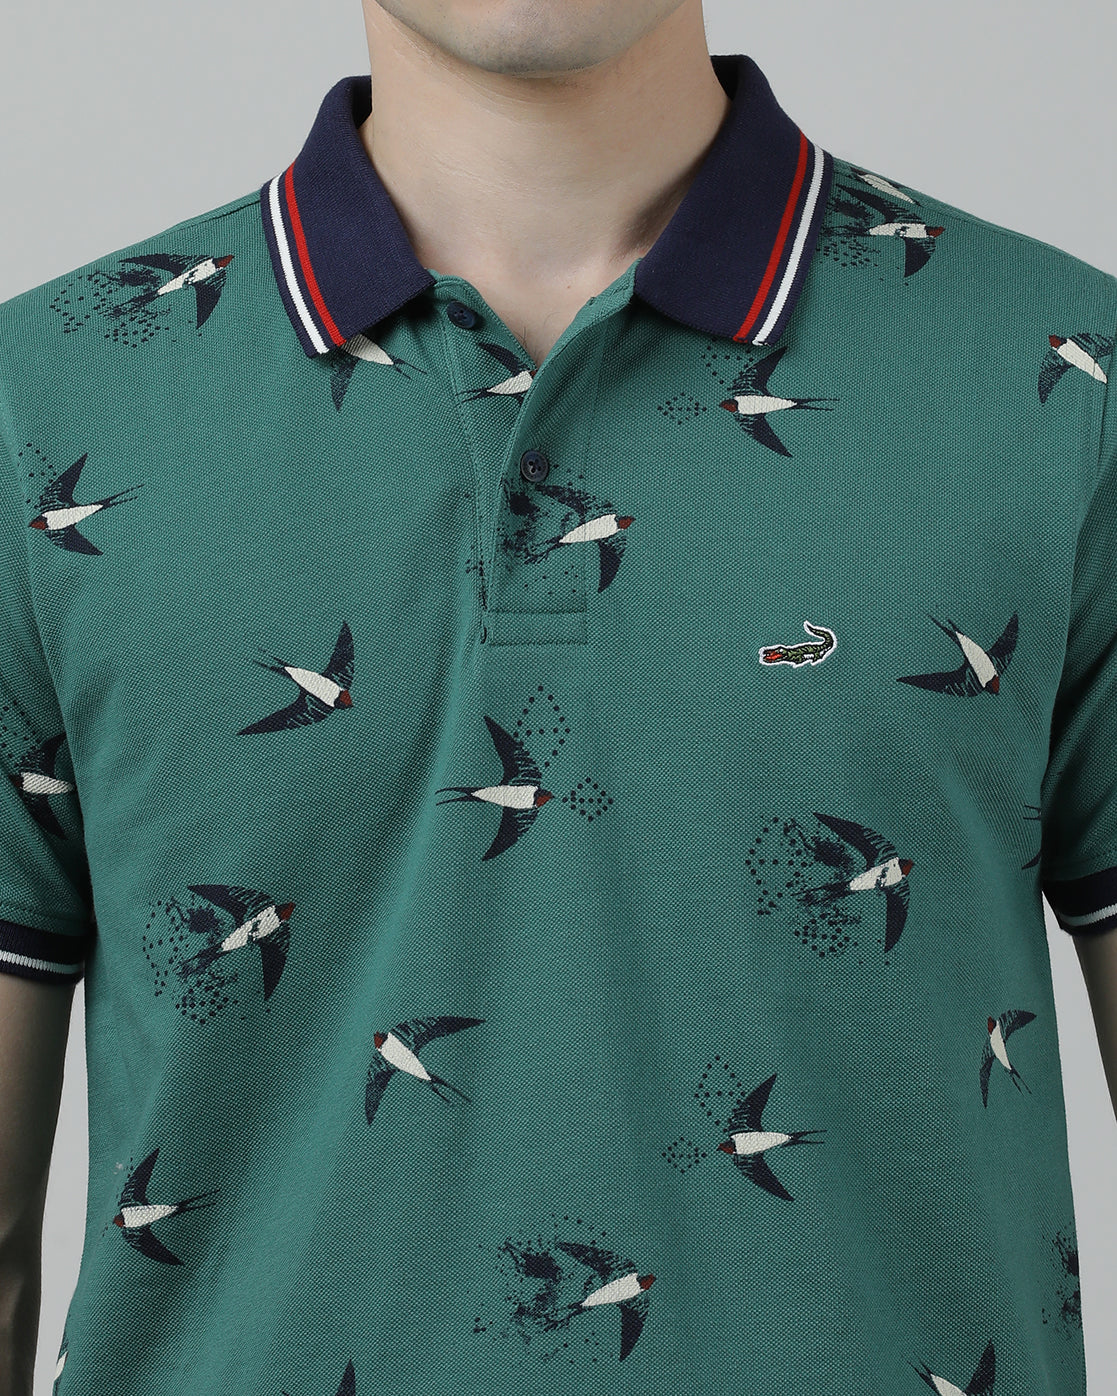 Casual Green T-Shirt Polo Printed Half Sleeve Slim Fit with Collar for Men